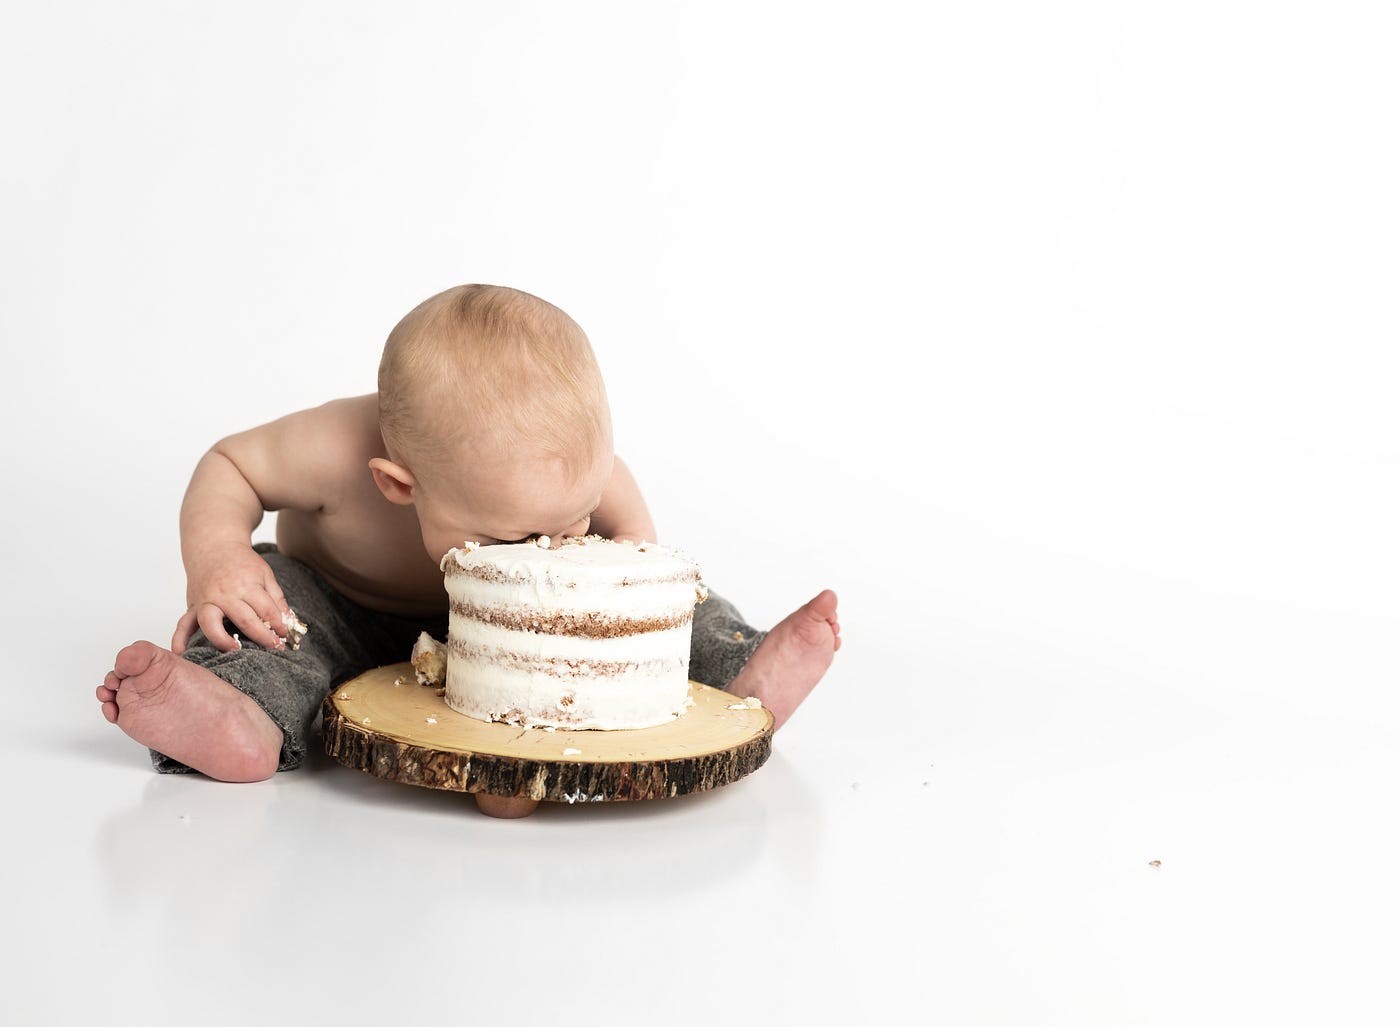 A toddler puts his face into a white cake, the dessert between his splayed legs (as he sits).